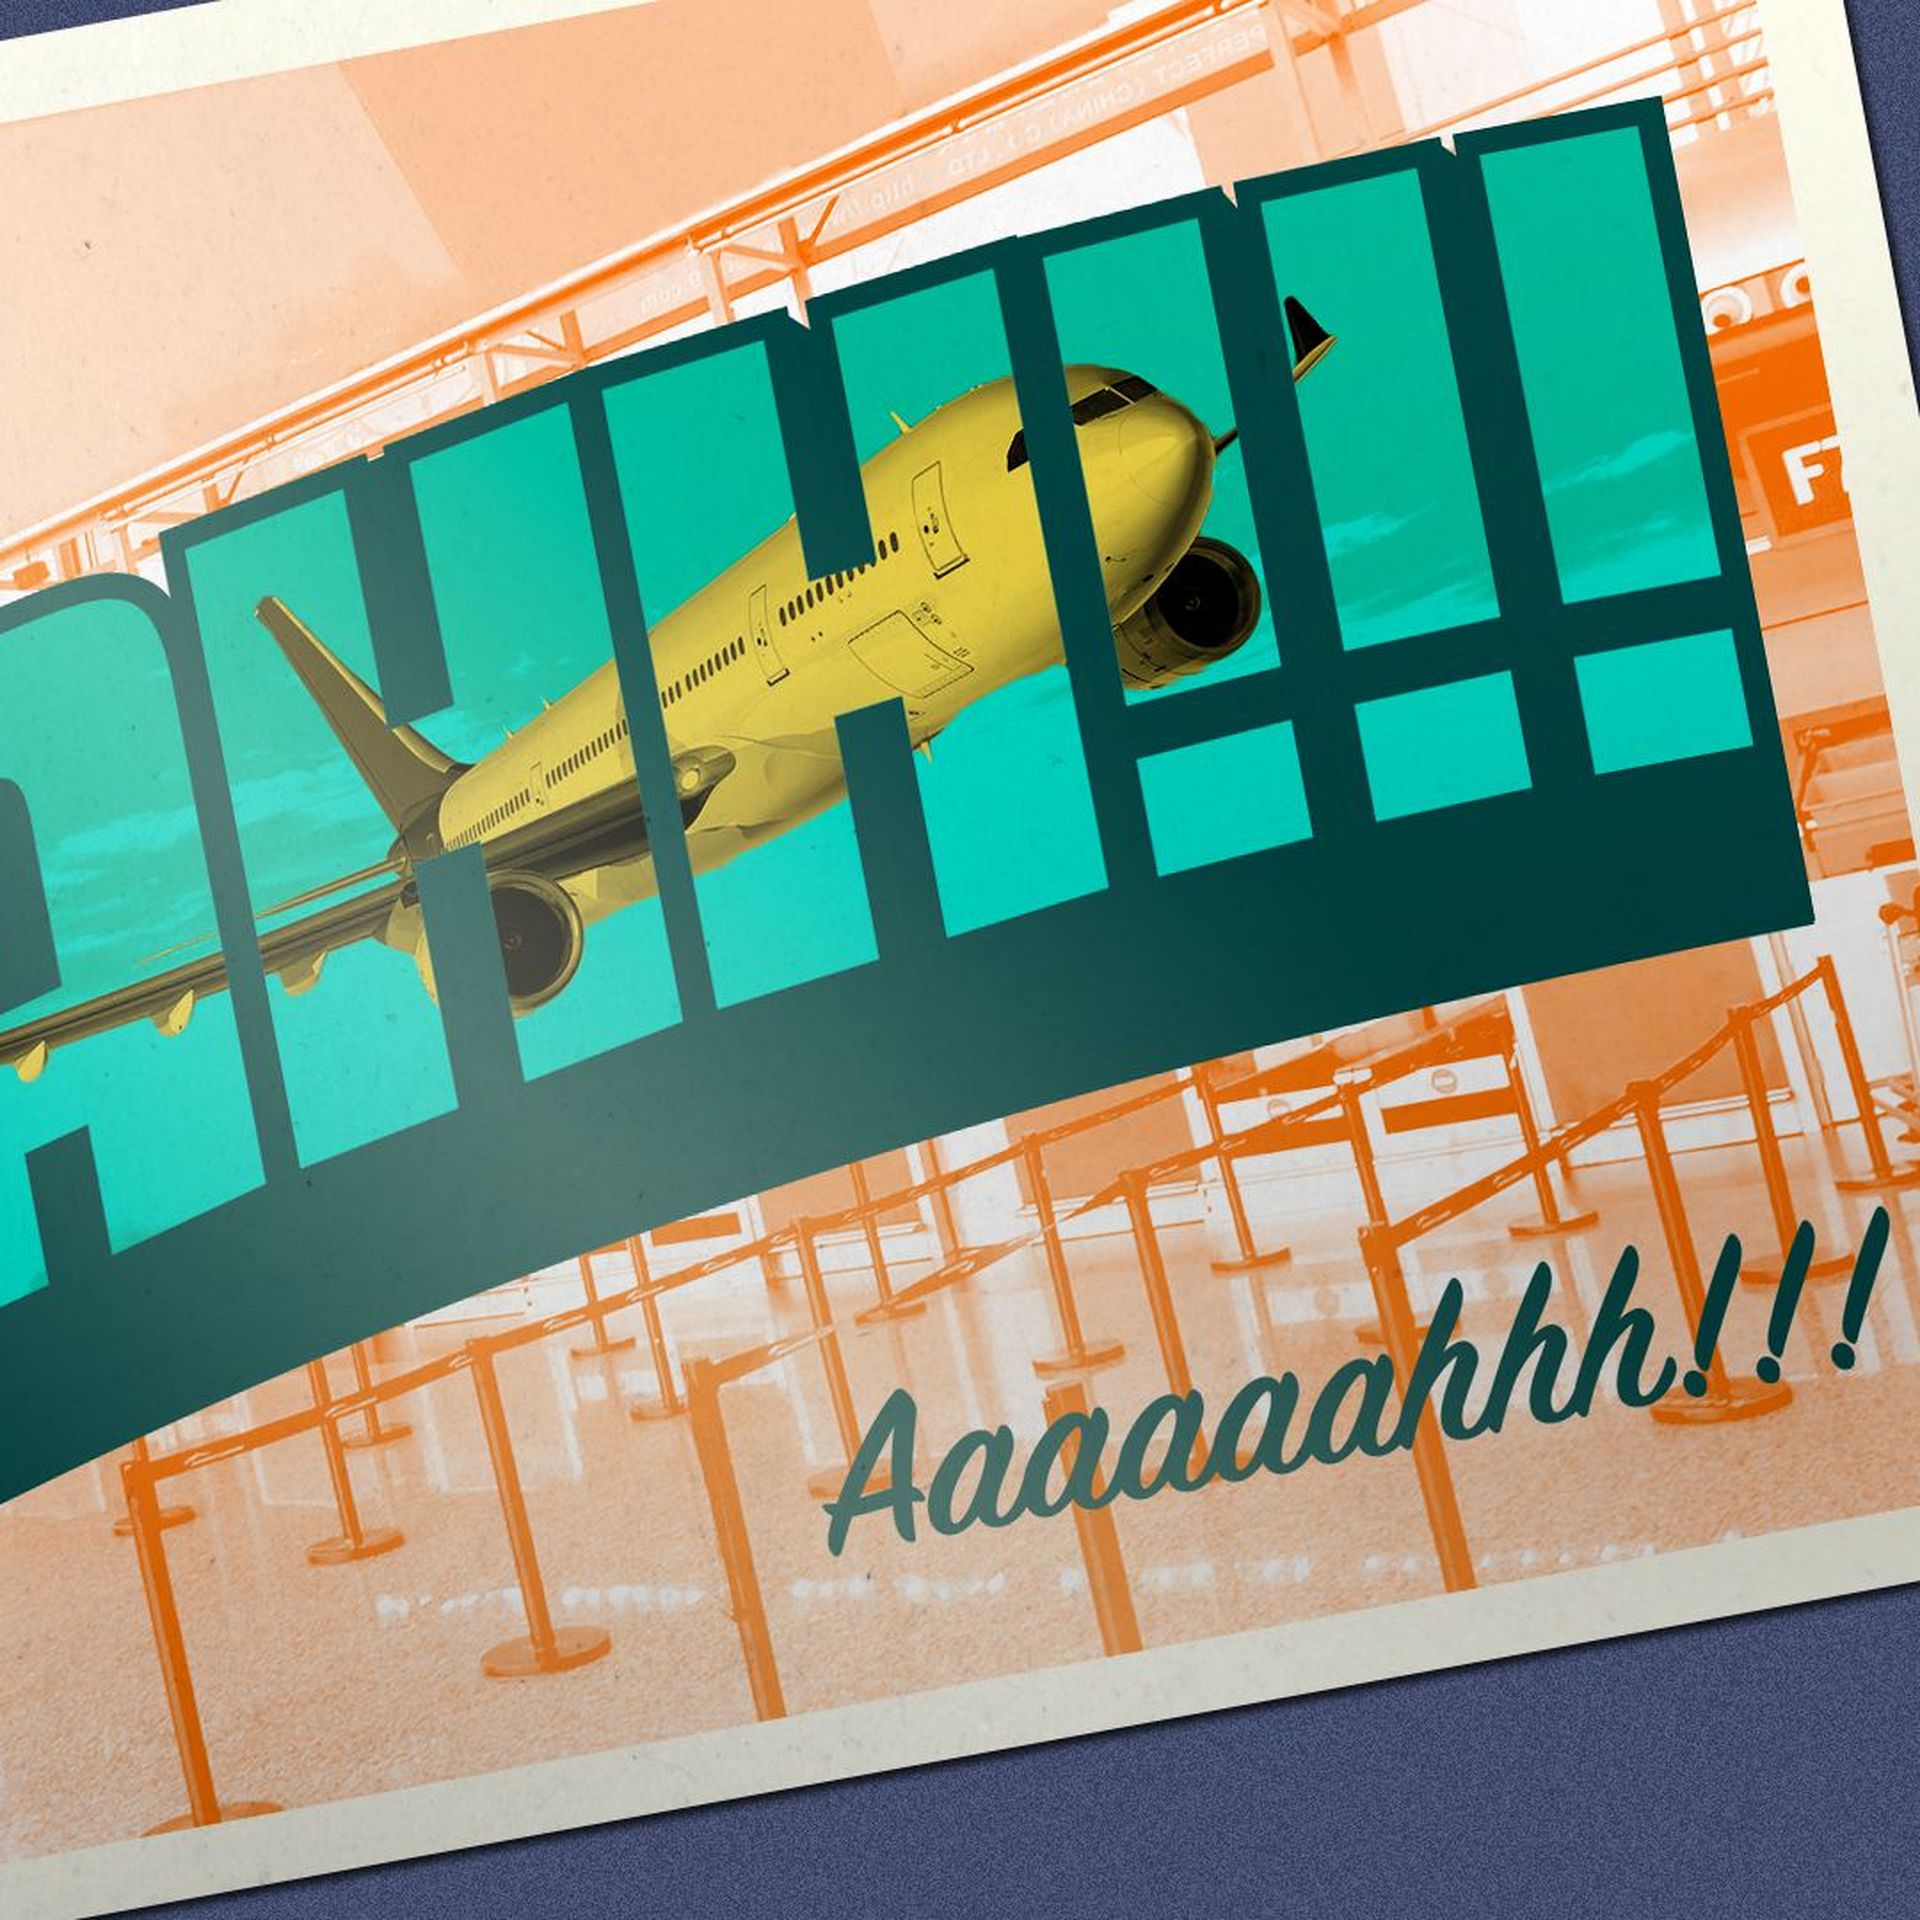 Illustration of a travel postcard with an airplane appearing in the text of a scream.